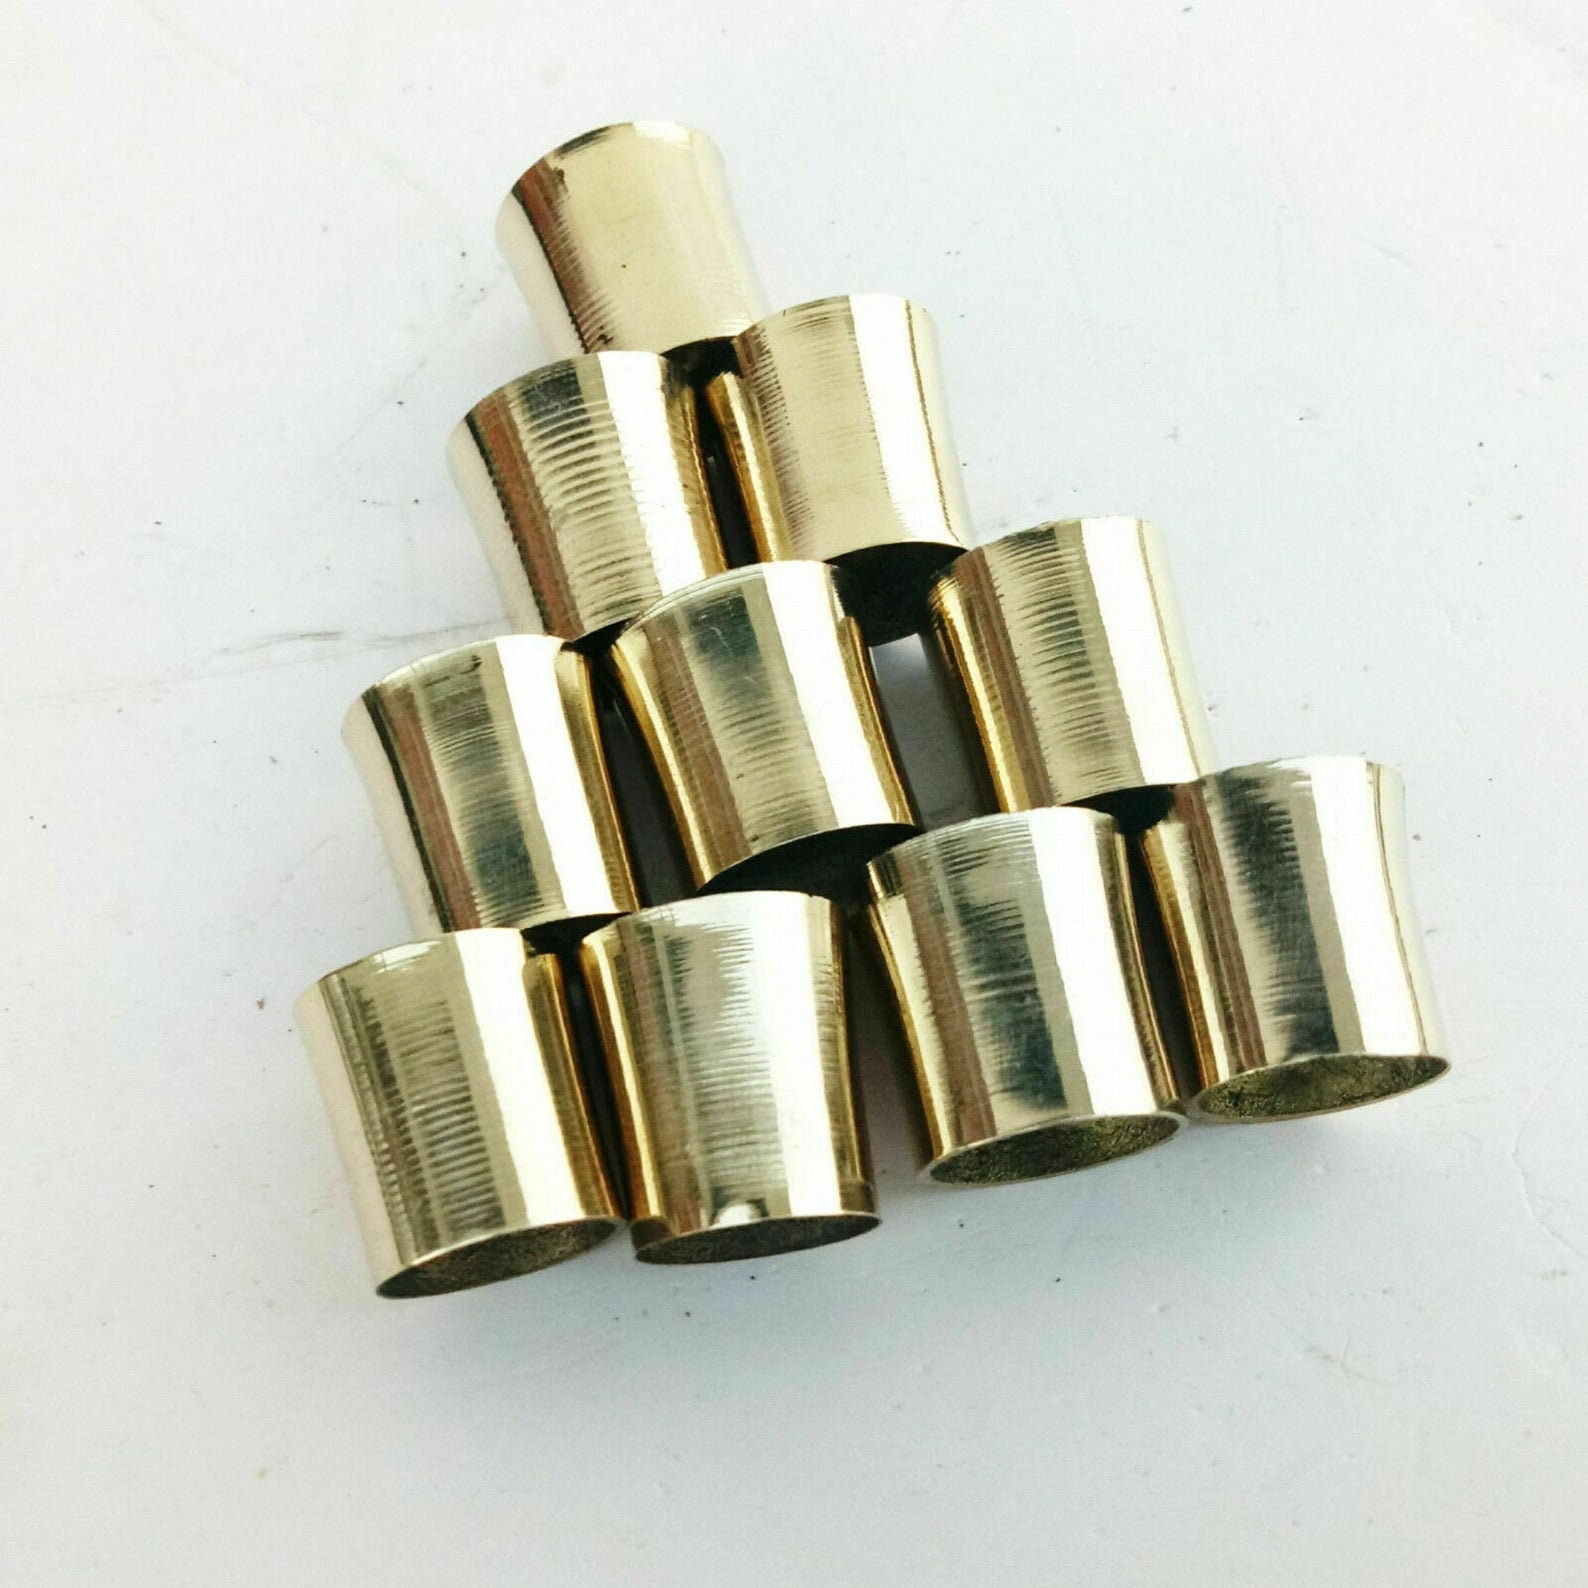 Lot of 10 Solid Brass Spare Tip for Walking Stick Cane Spare Part of  Antique Vintage Cane Stick Spare Rubber Tip for Walking Cane Stick -   Canada